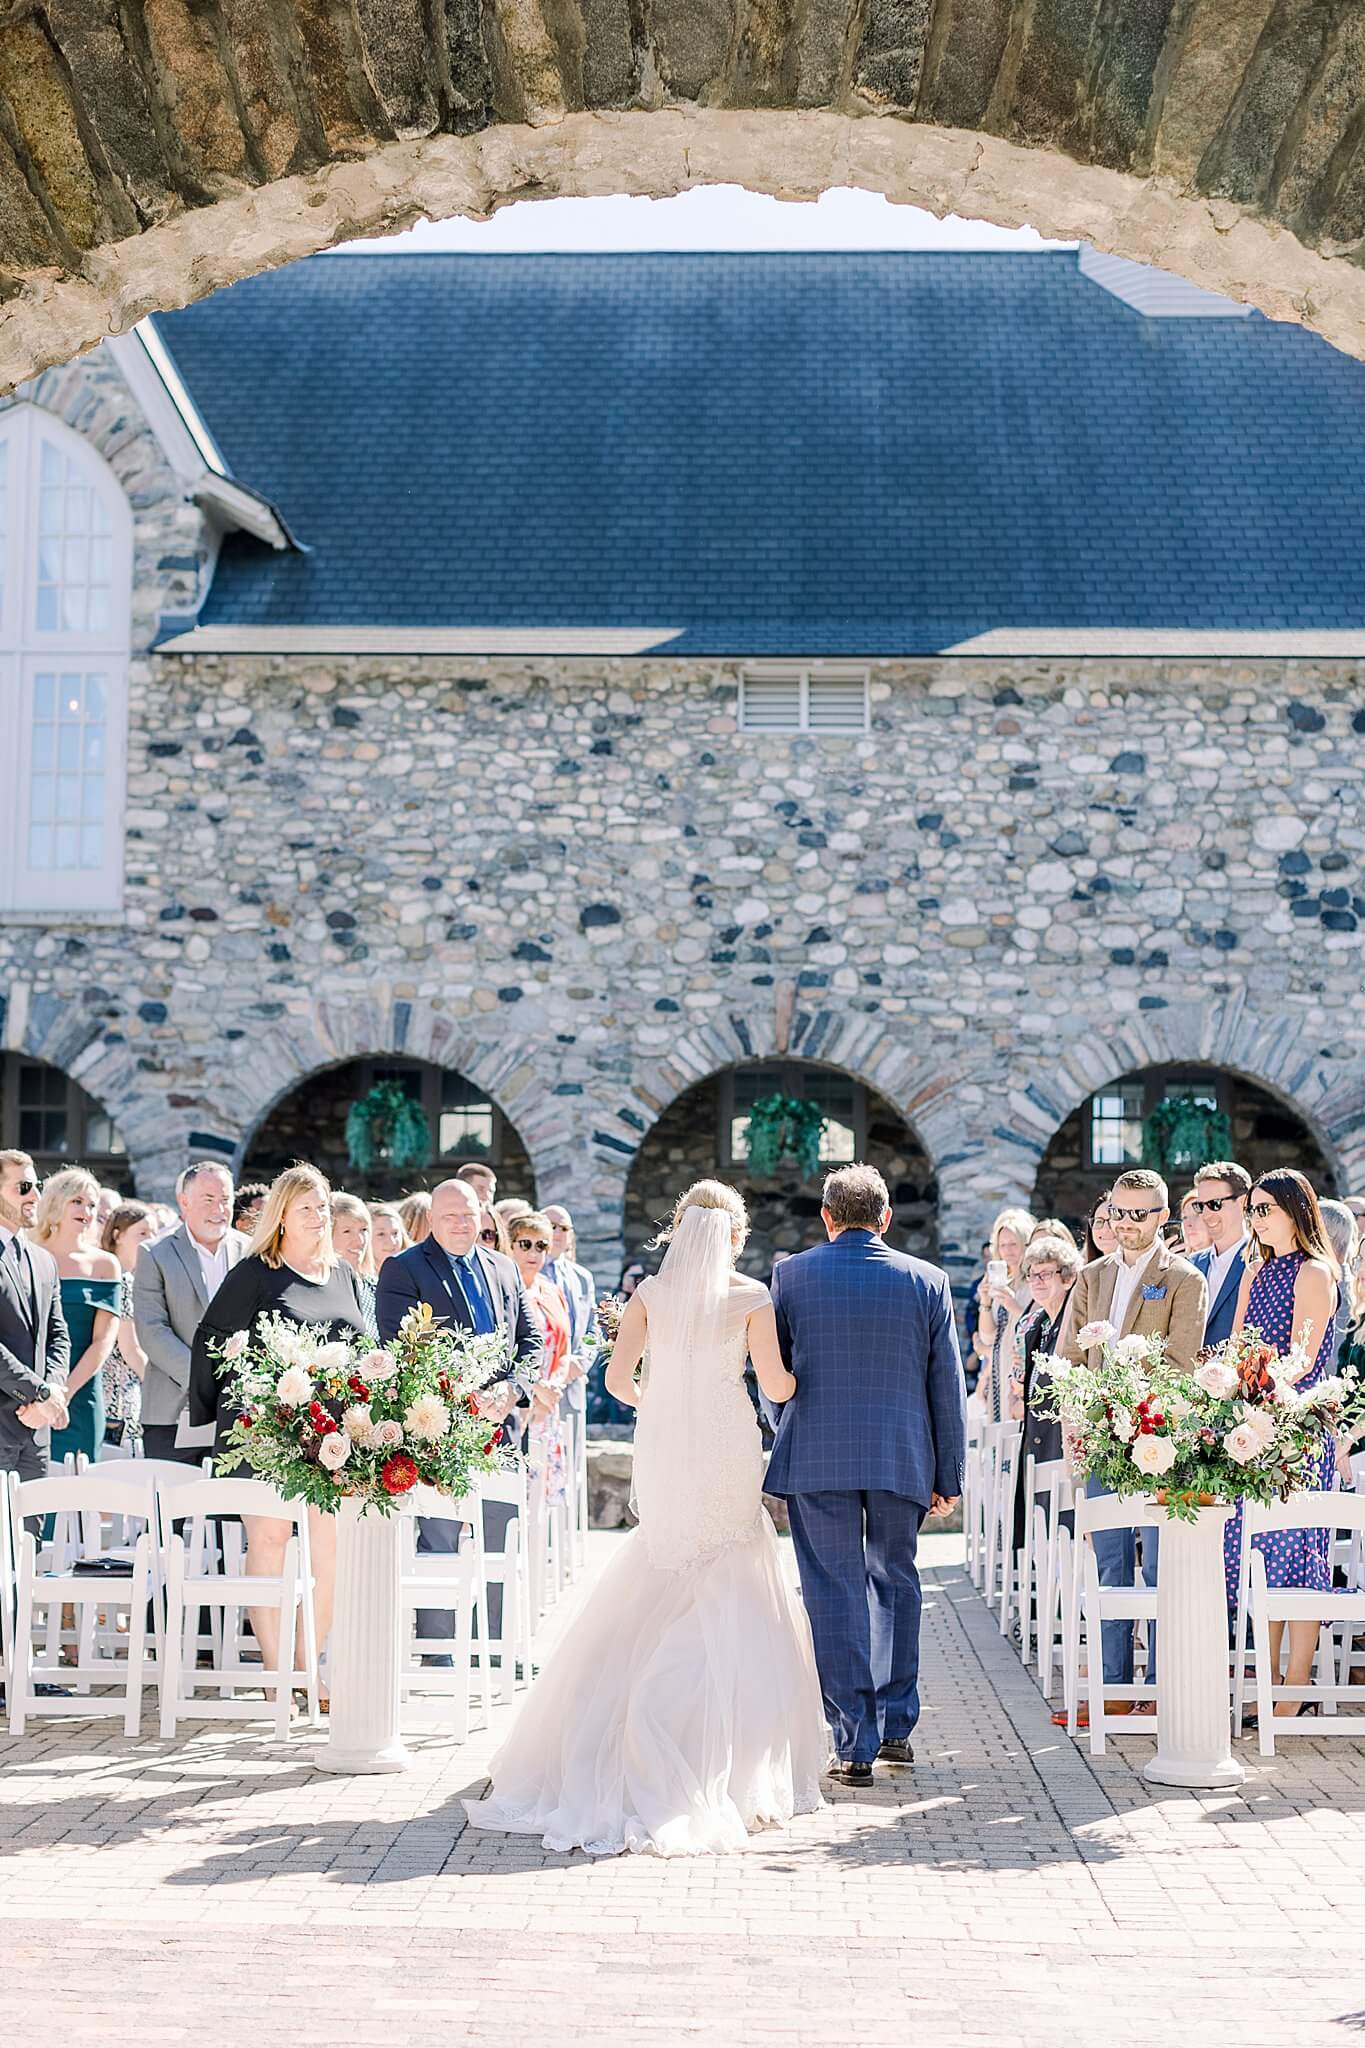 Bride walks up the aisle to meet groom during September Castle Farms wedding.